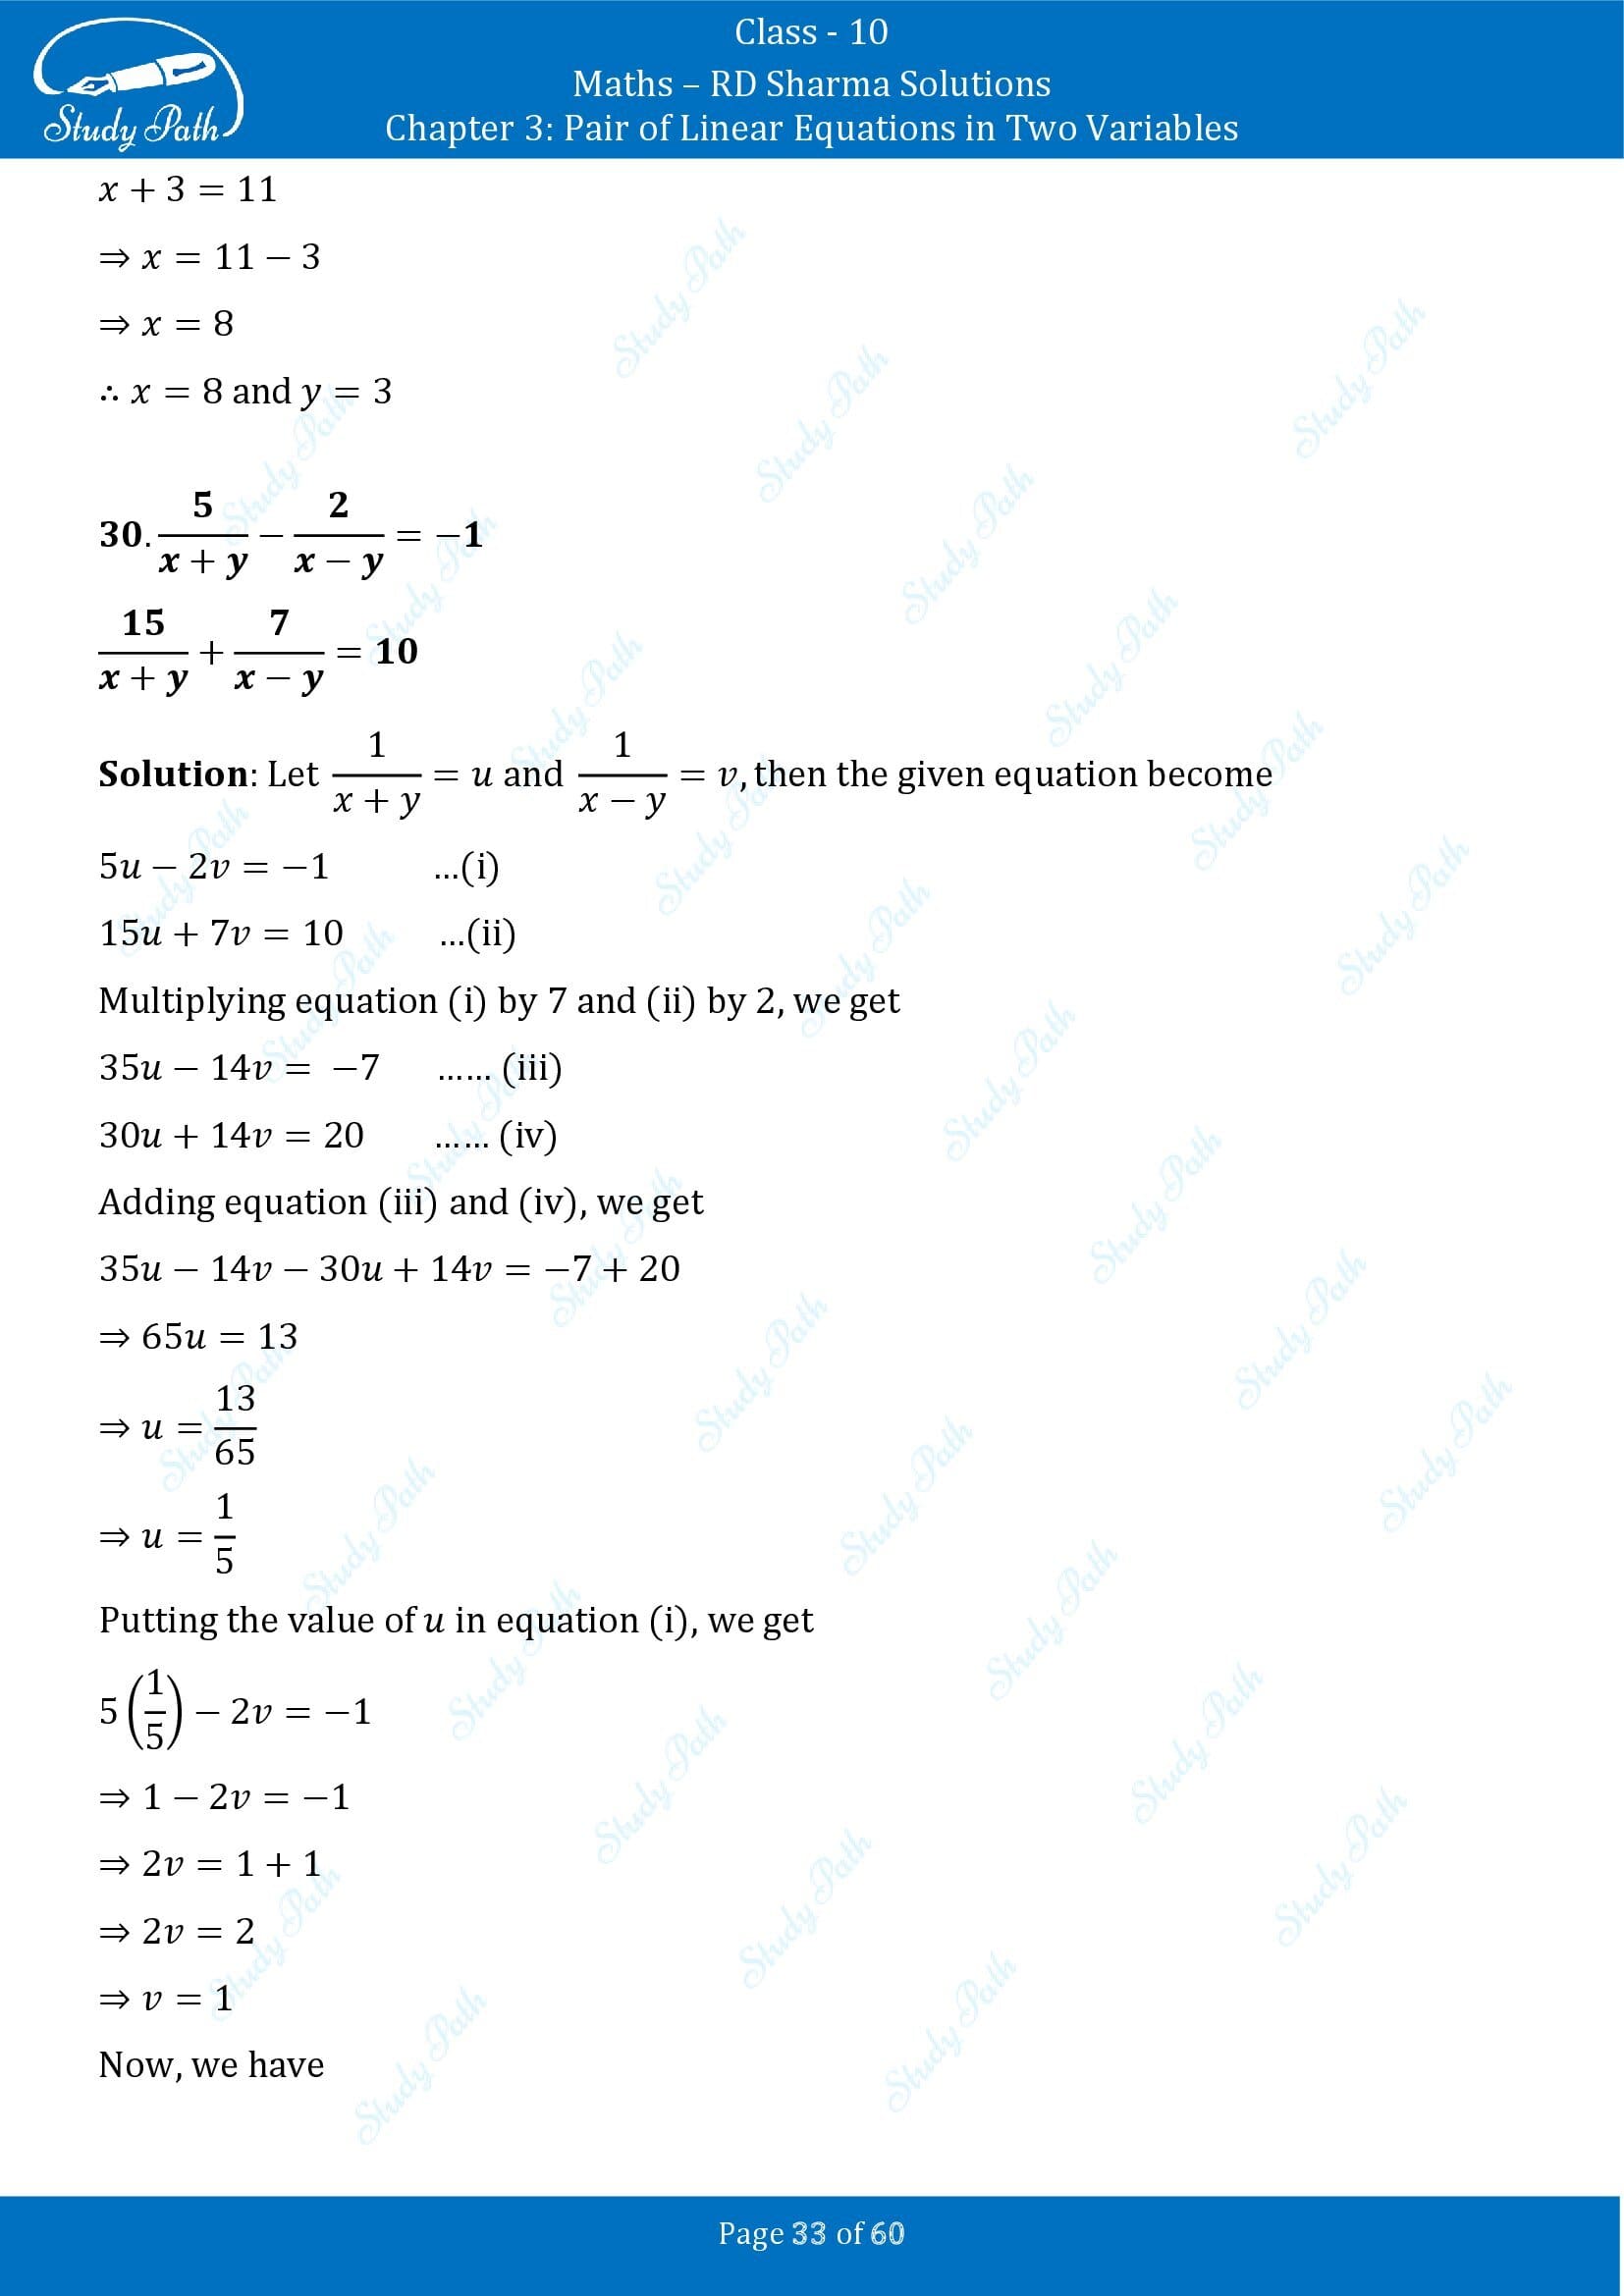 RD Sharma Solutions Class 10 Chapter 3 Pair of Linear Equations in Two Variables Exercise 3.3 00033